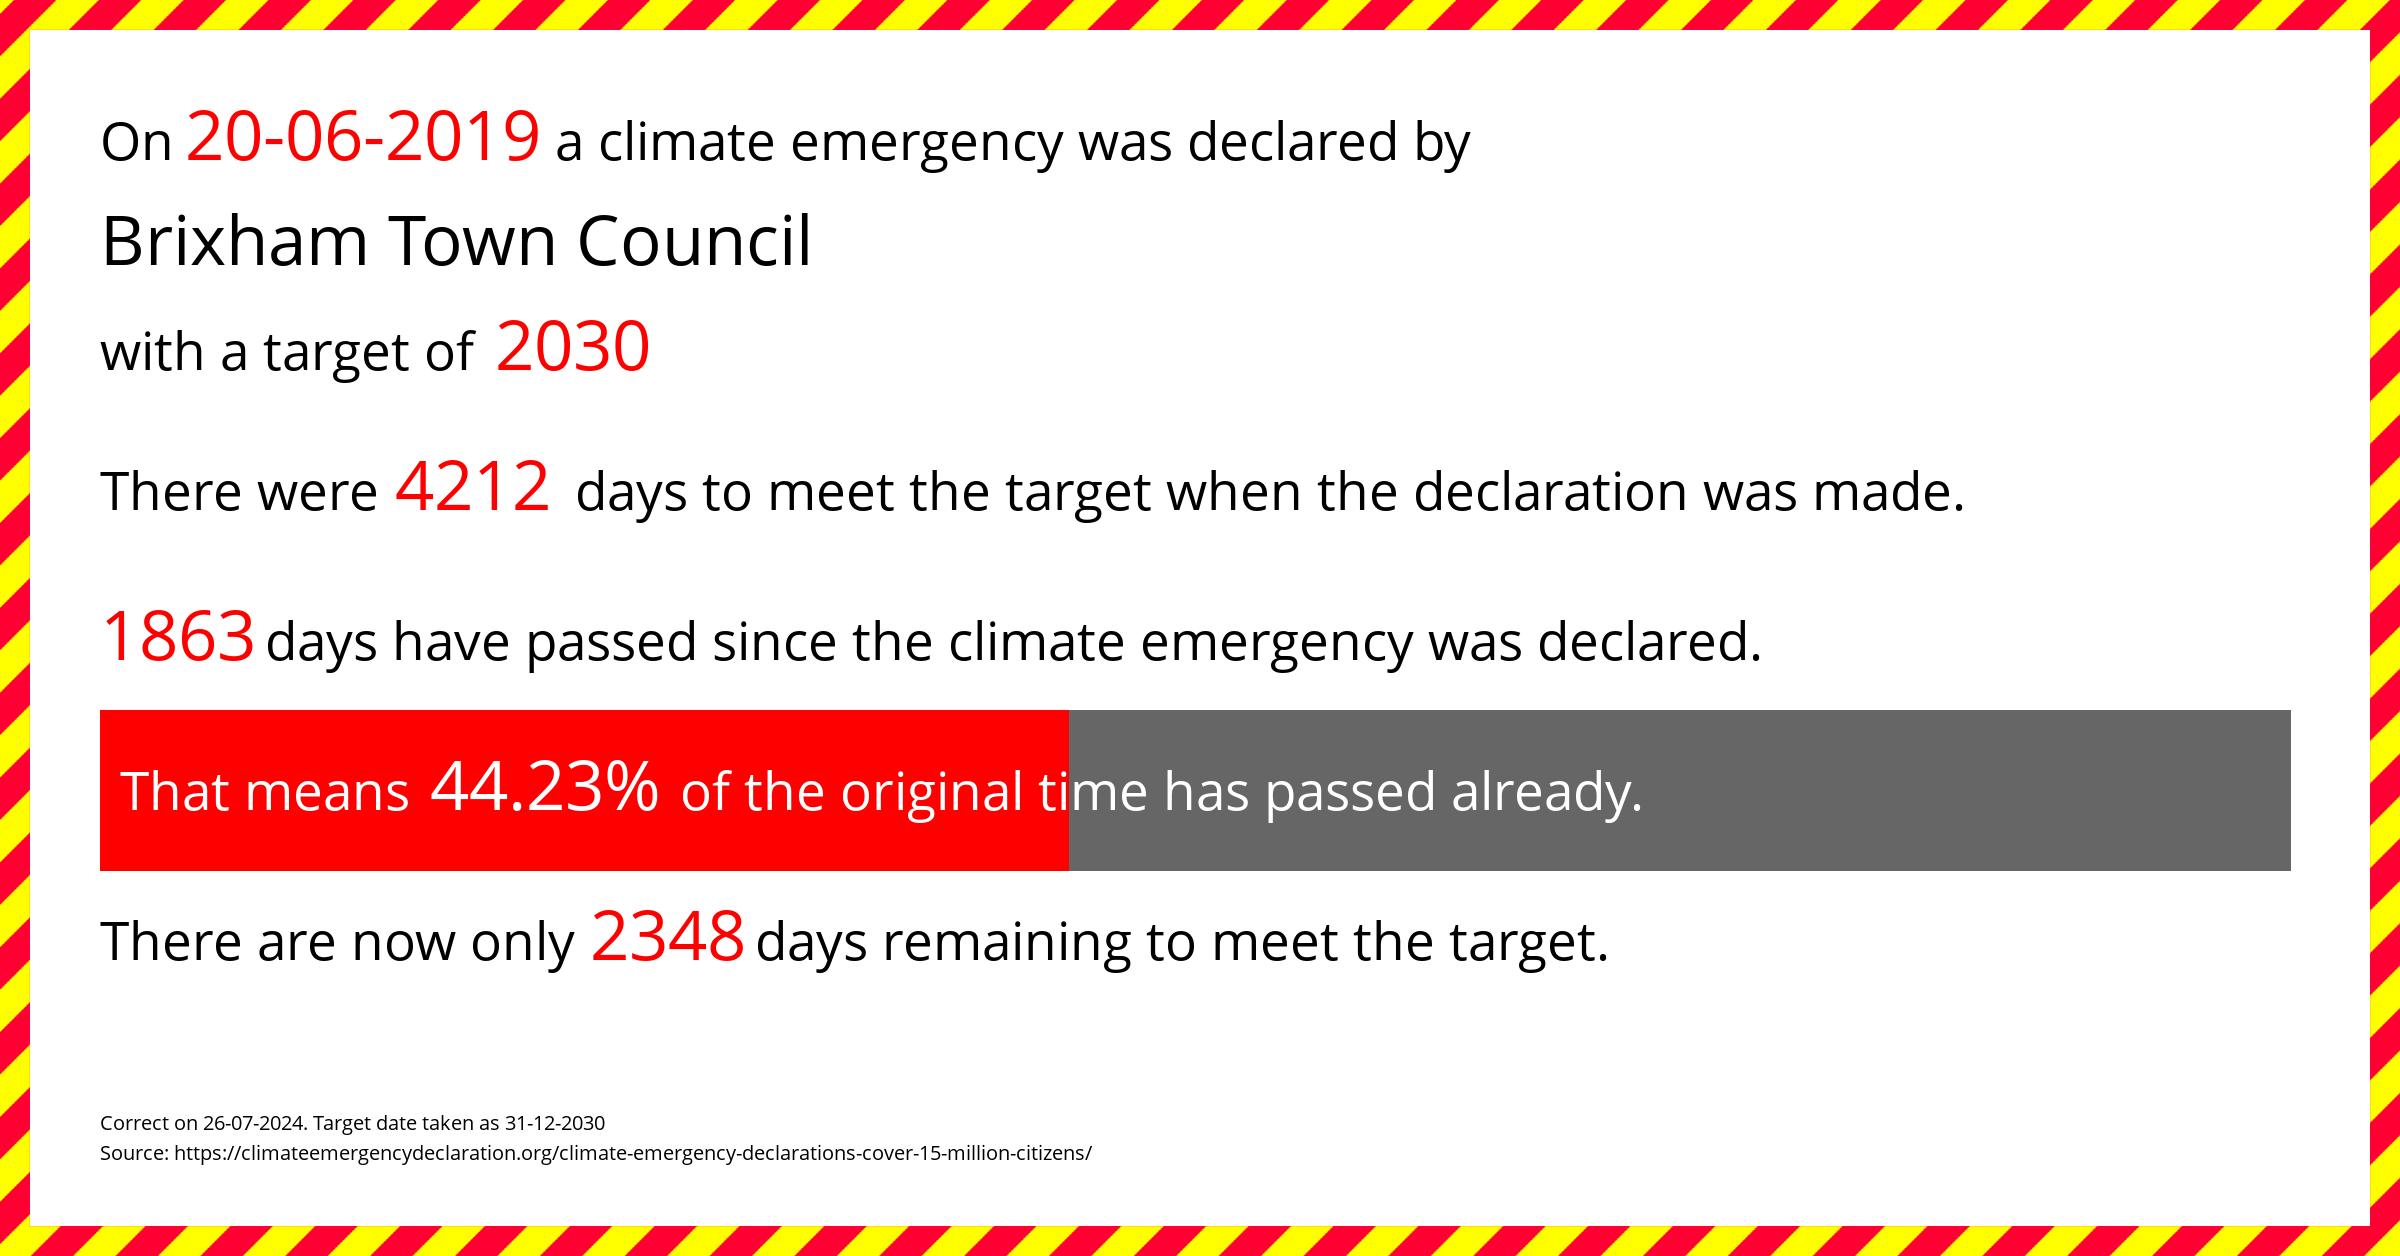 Brixham Town Council declared a Climate emergency on Thursday 20th June 2019, with a target of 2030.